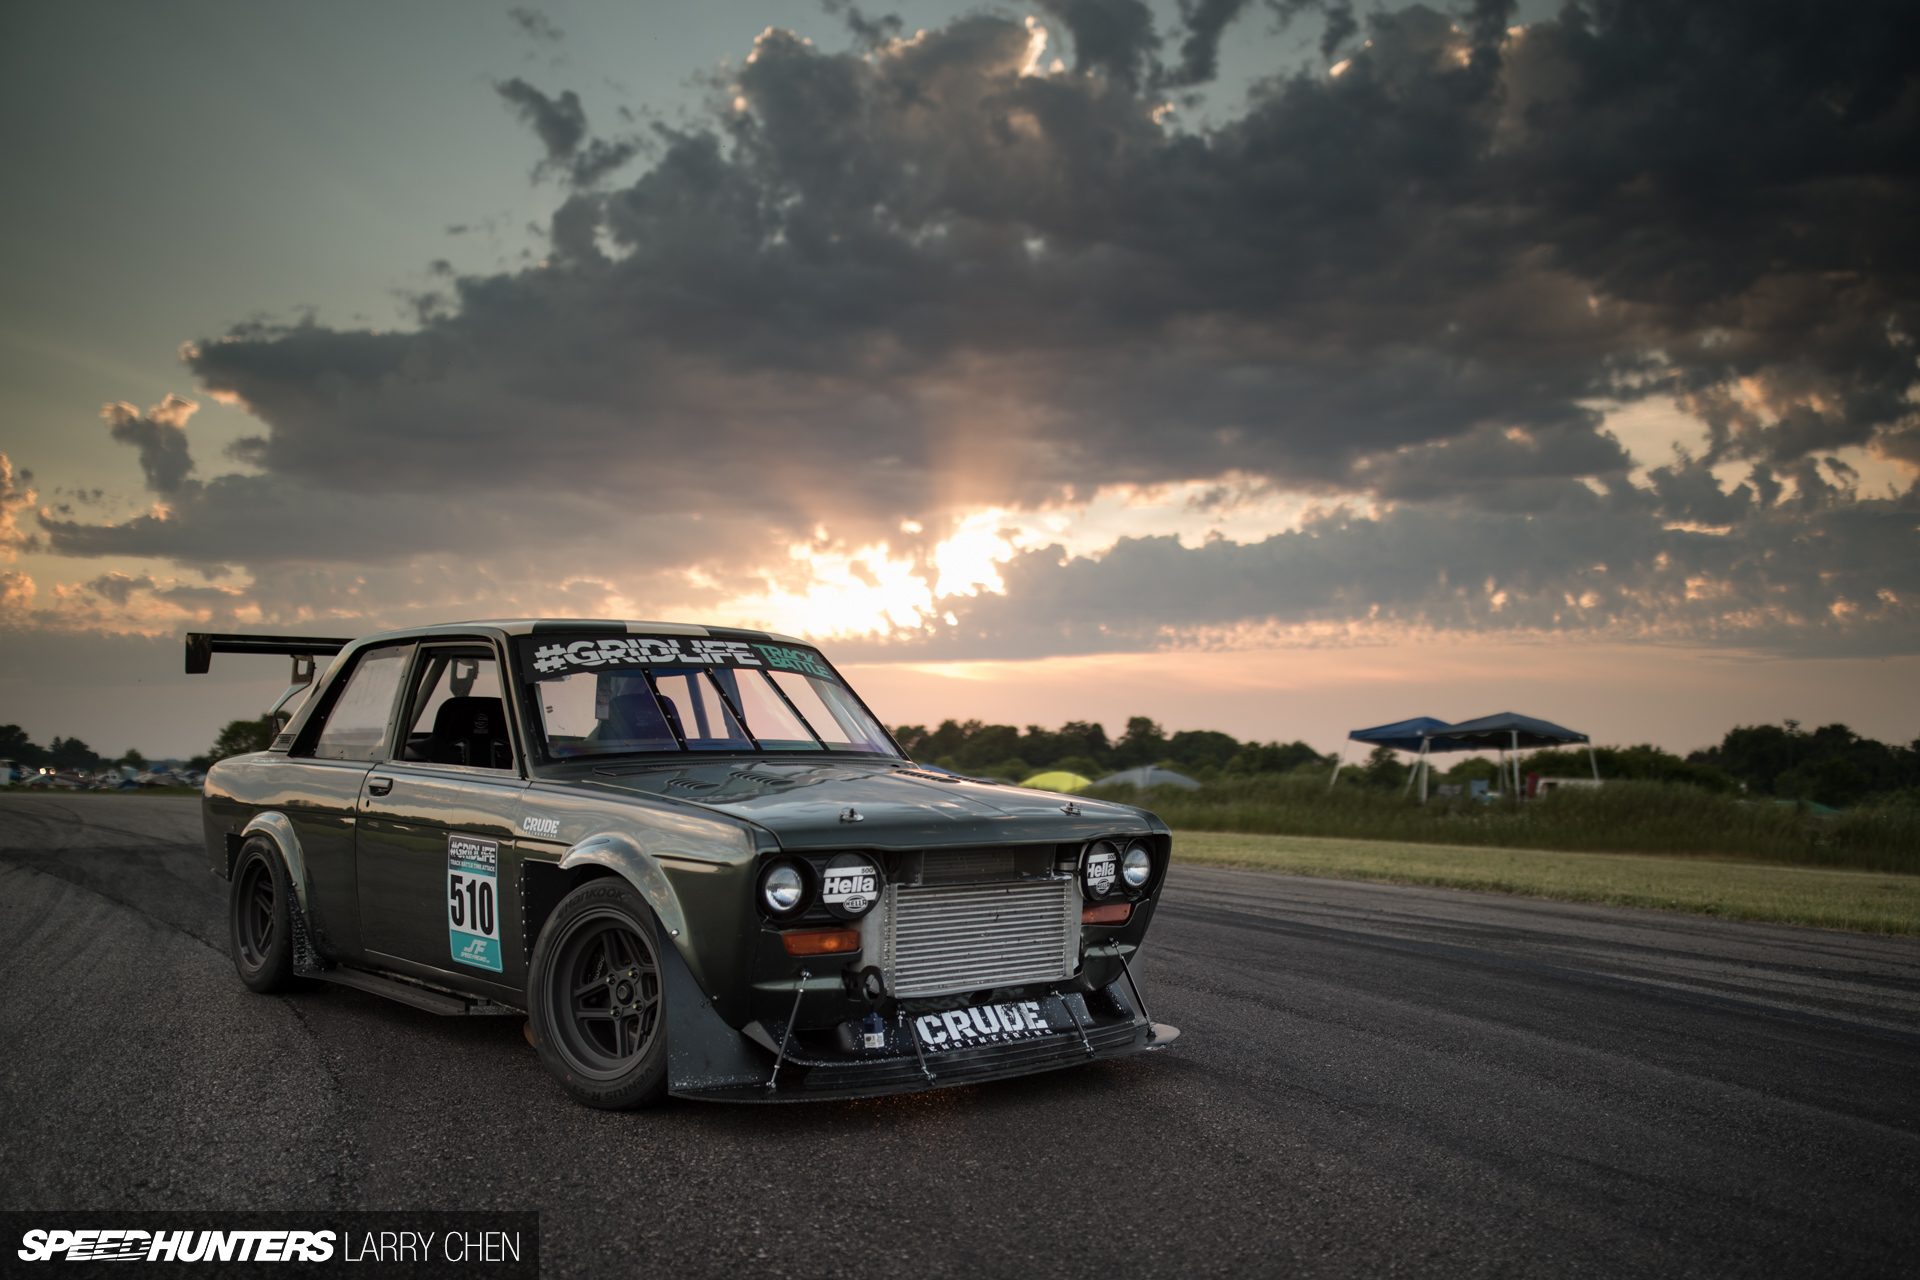 Larry_Chen_Speedhunters_cars_of_Gridlife_Midwest_2016-1.jpg